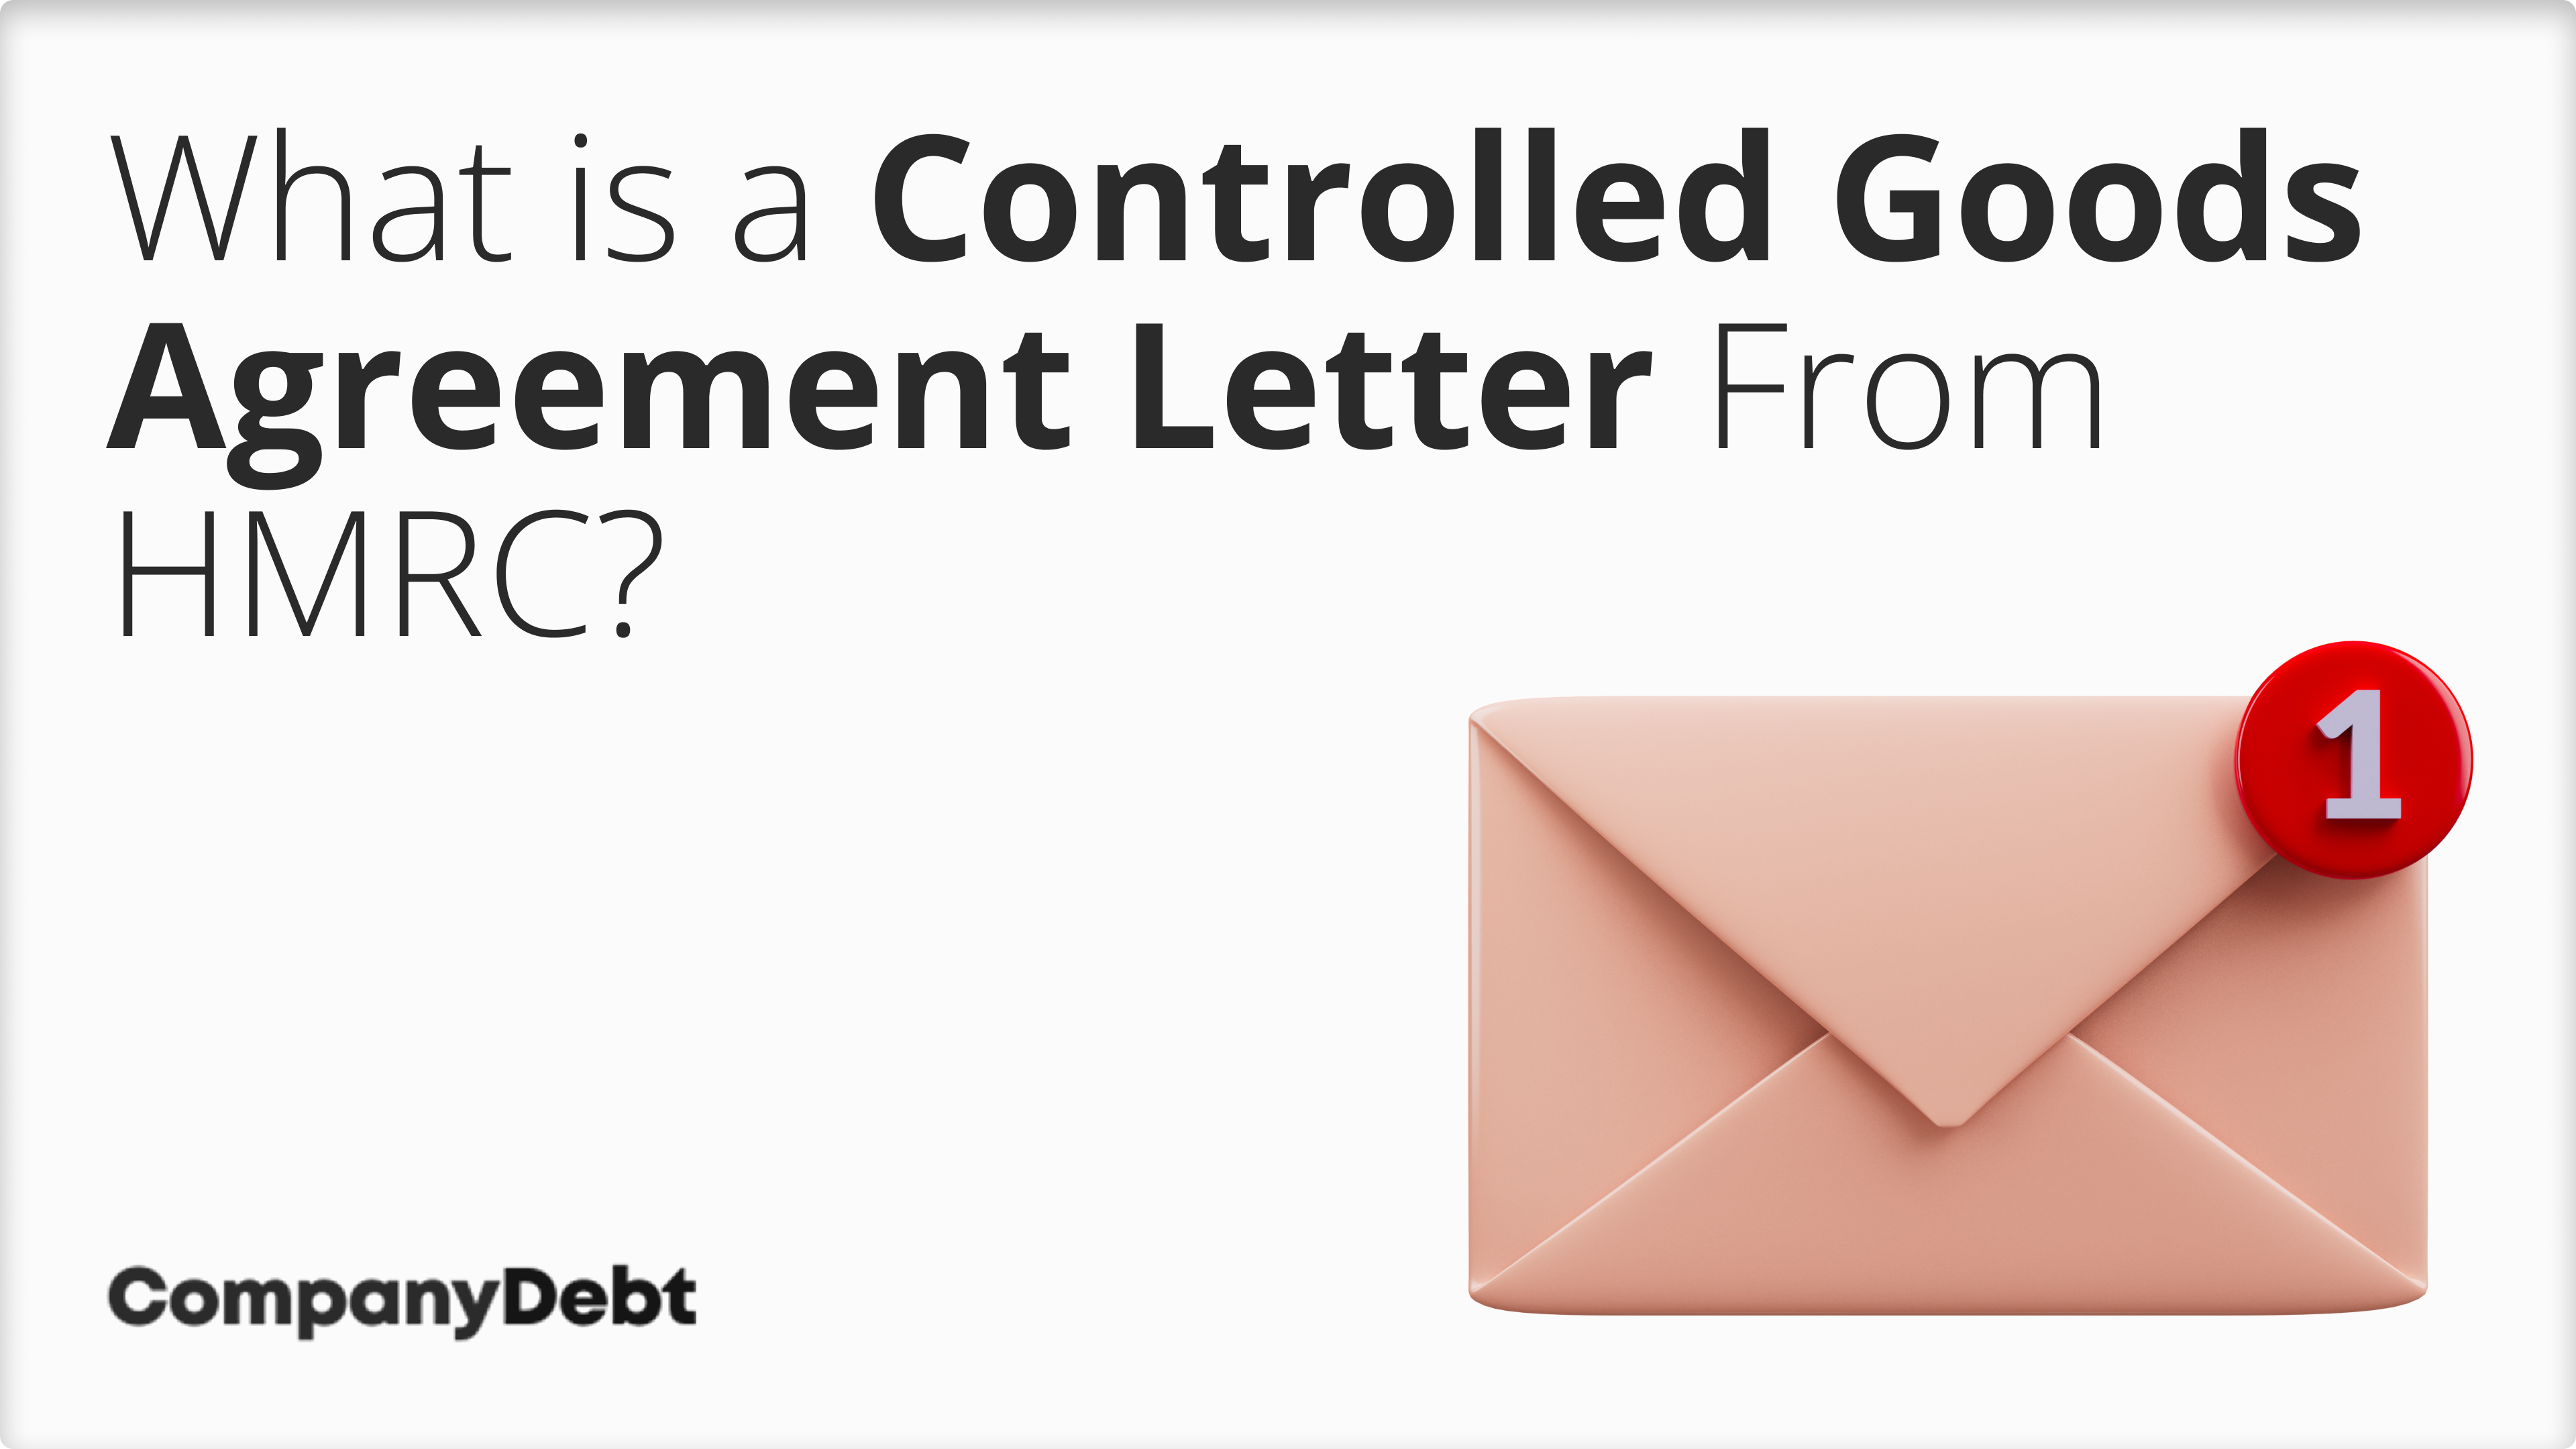 What is a Controlled Goods Agreement Letter From HMRC?